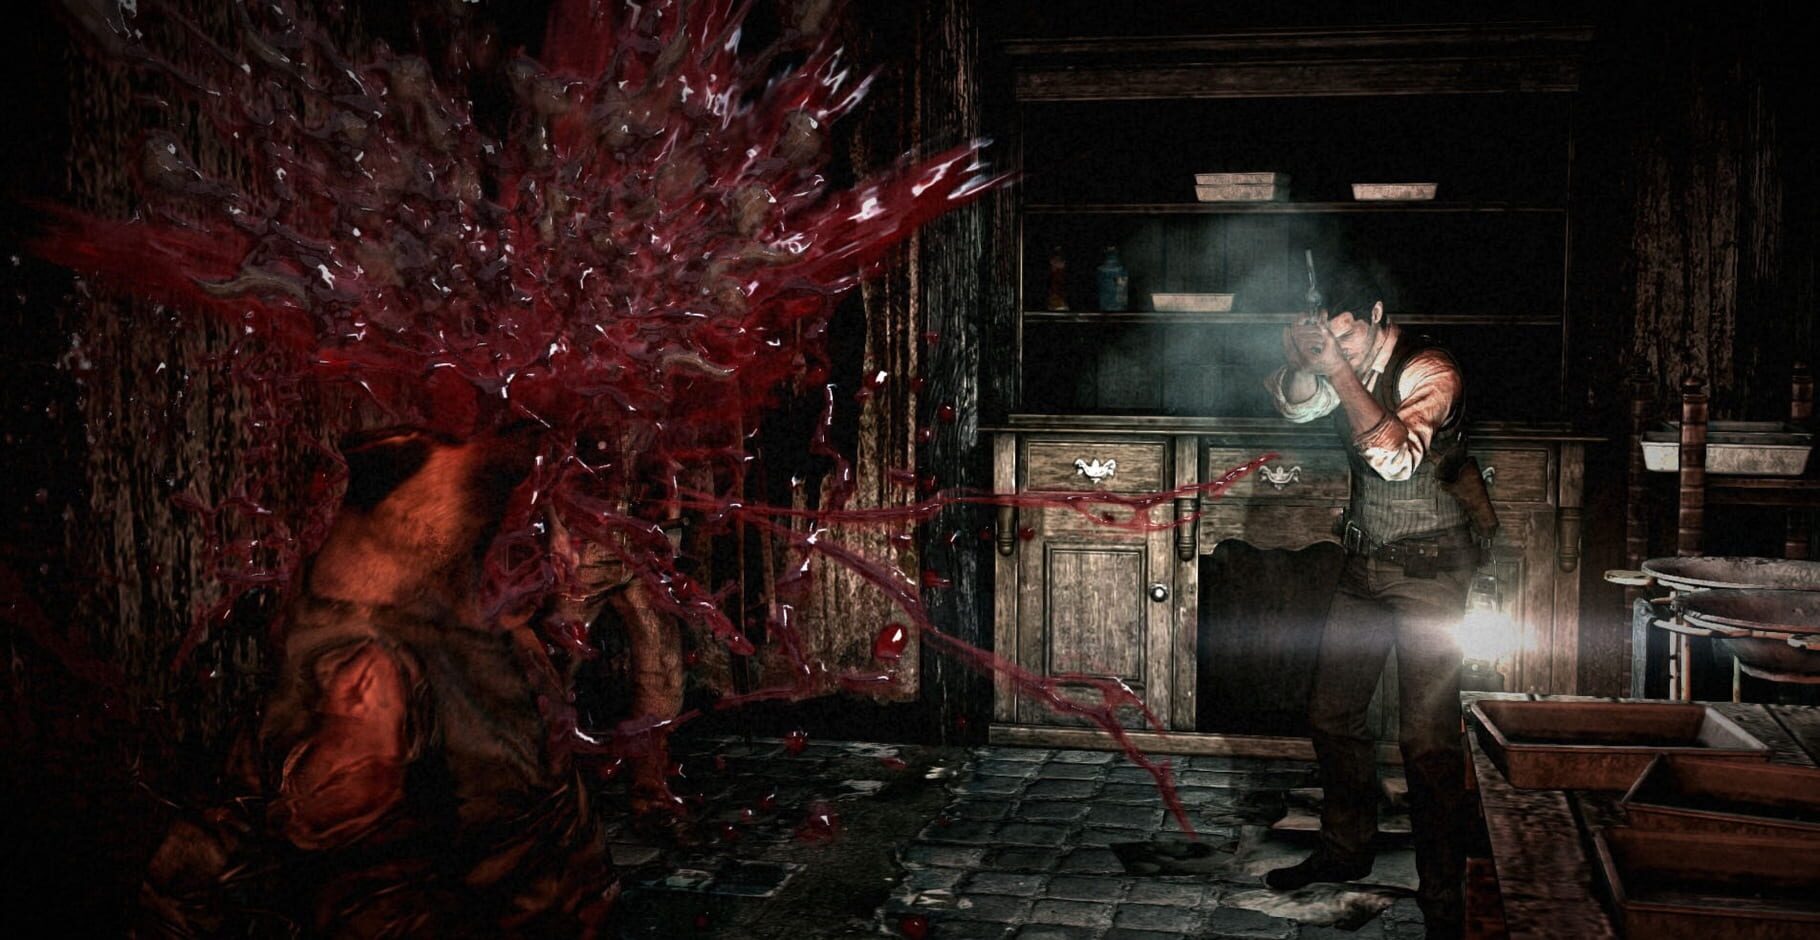 The Evil Within screenshots